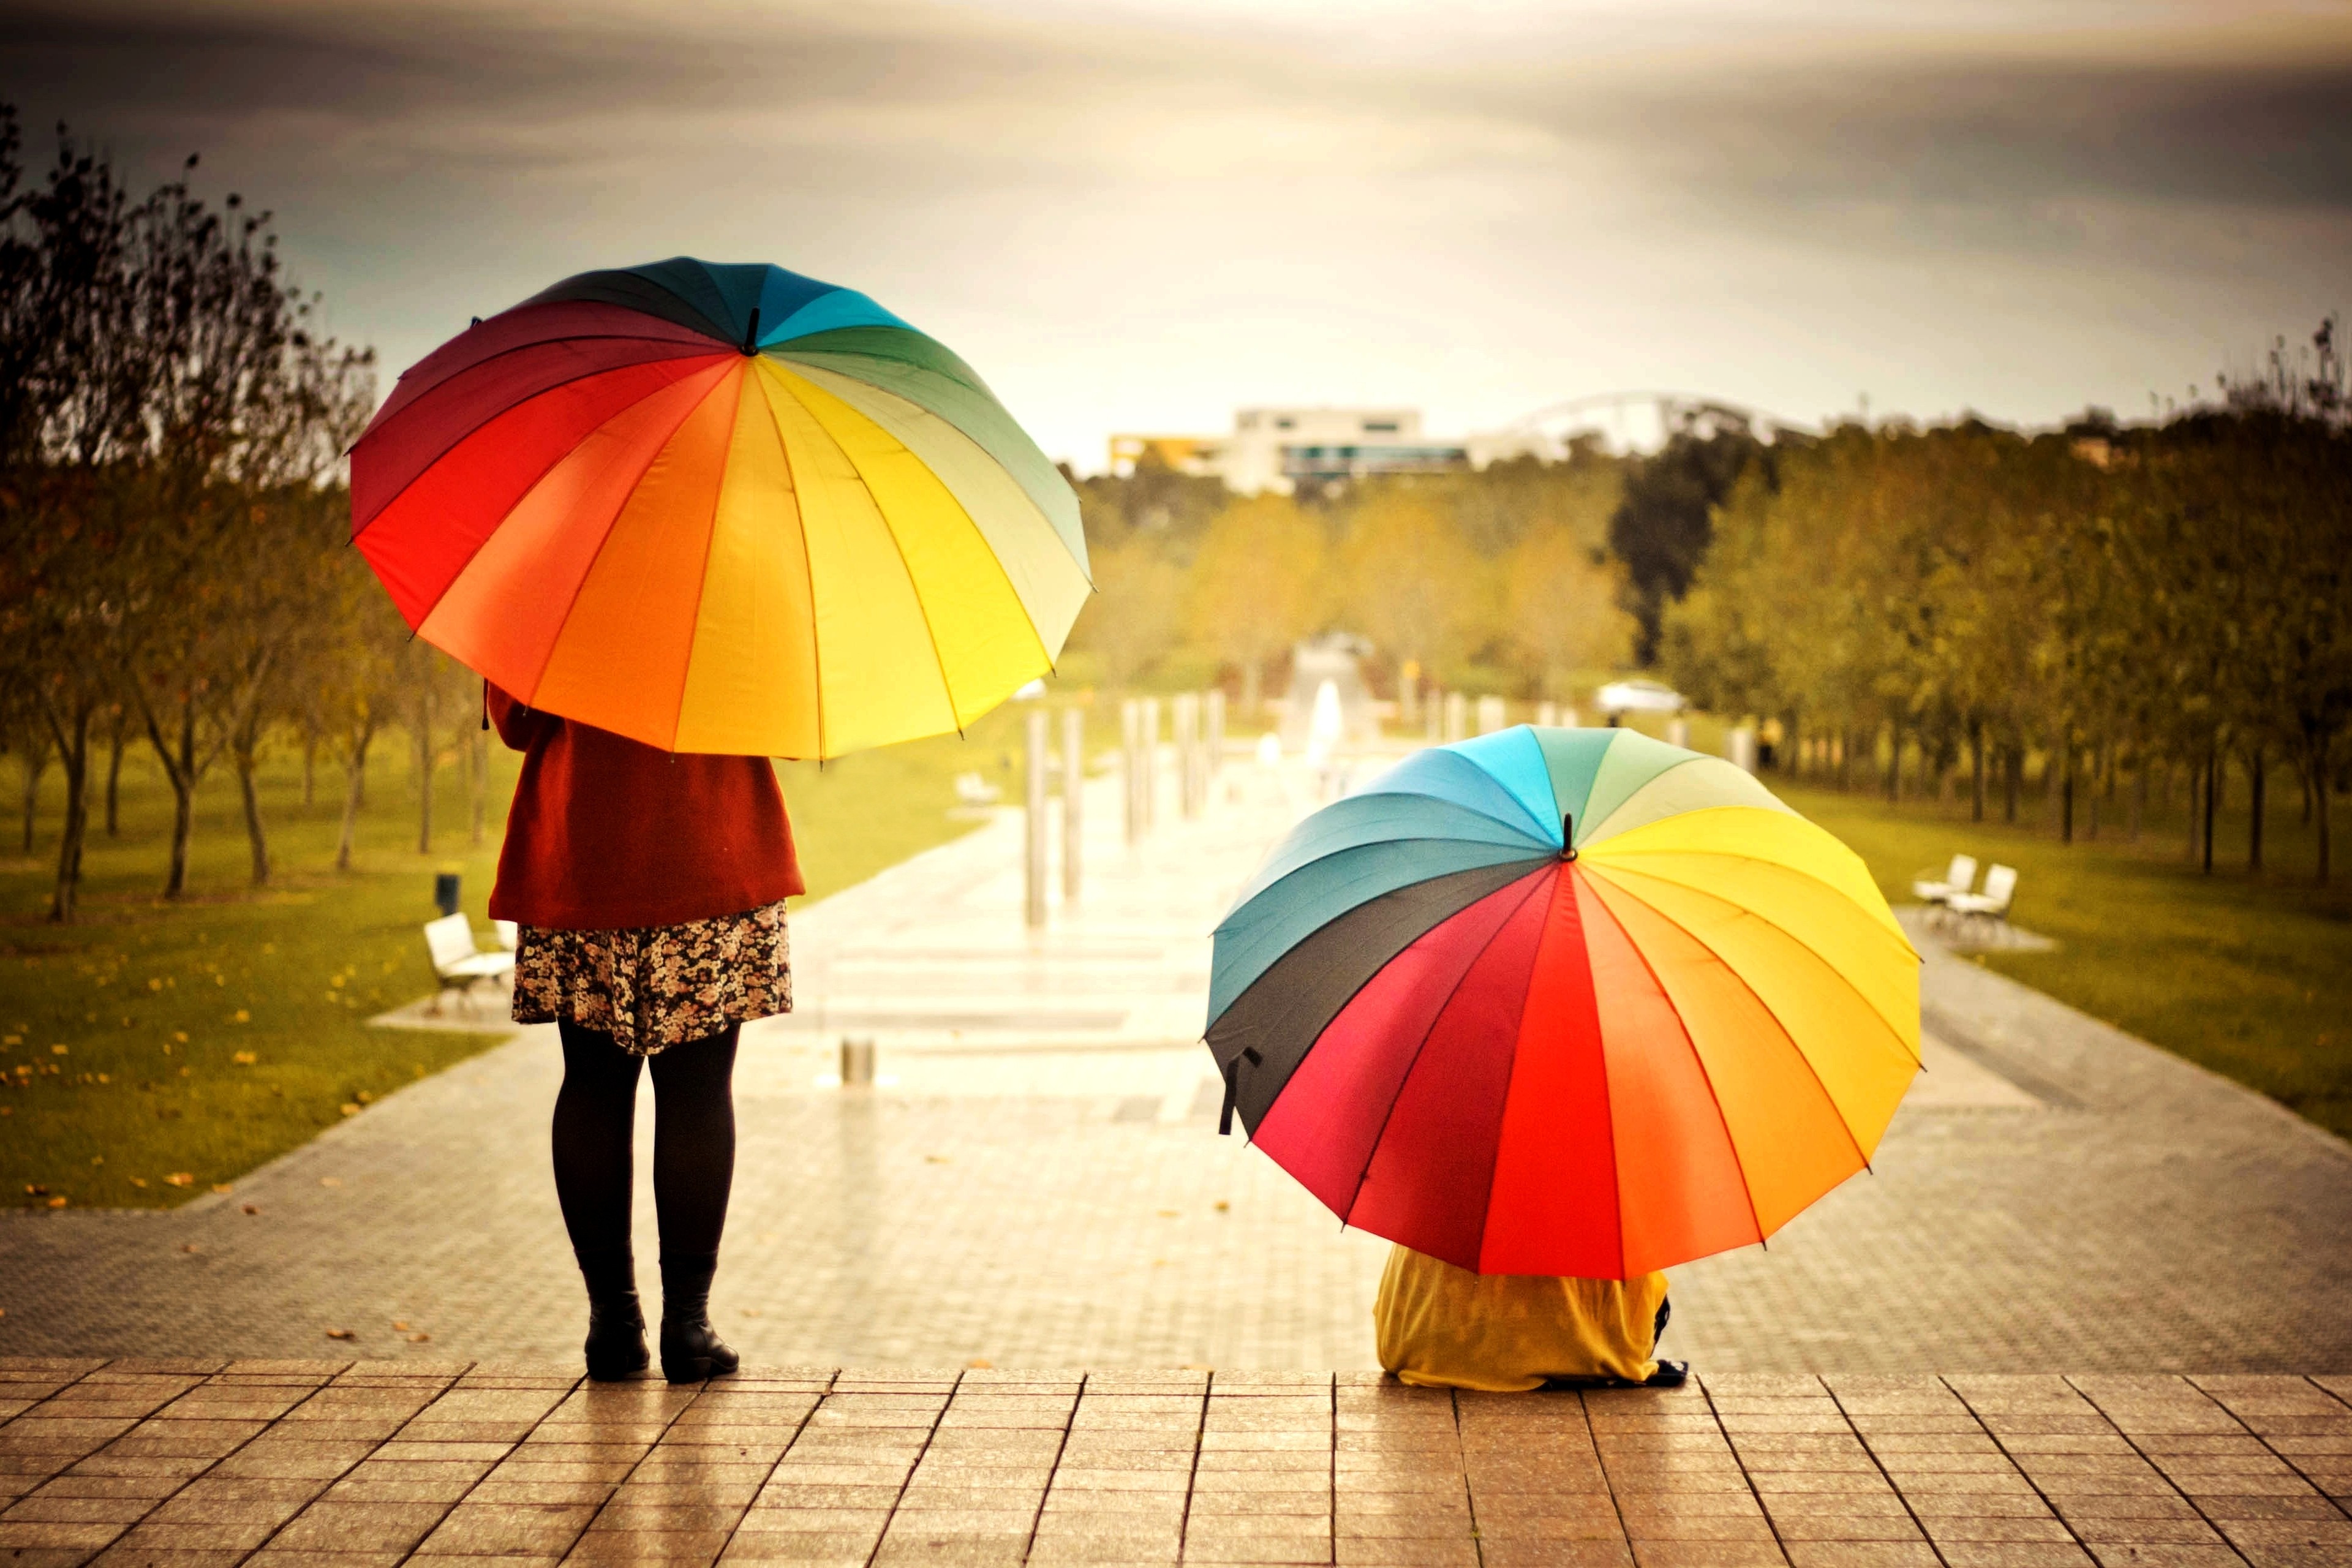 116097 download wallpaper miscellaneous, children, rainbow, miscellanea, multicolored, iridescent, mood, bad weather, umbrellas screensavers and pictures for free